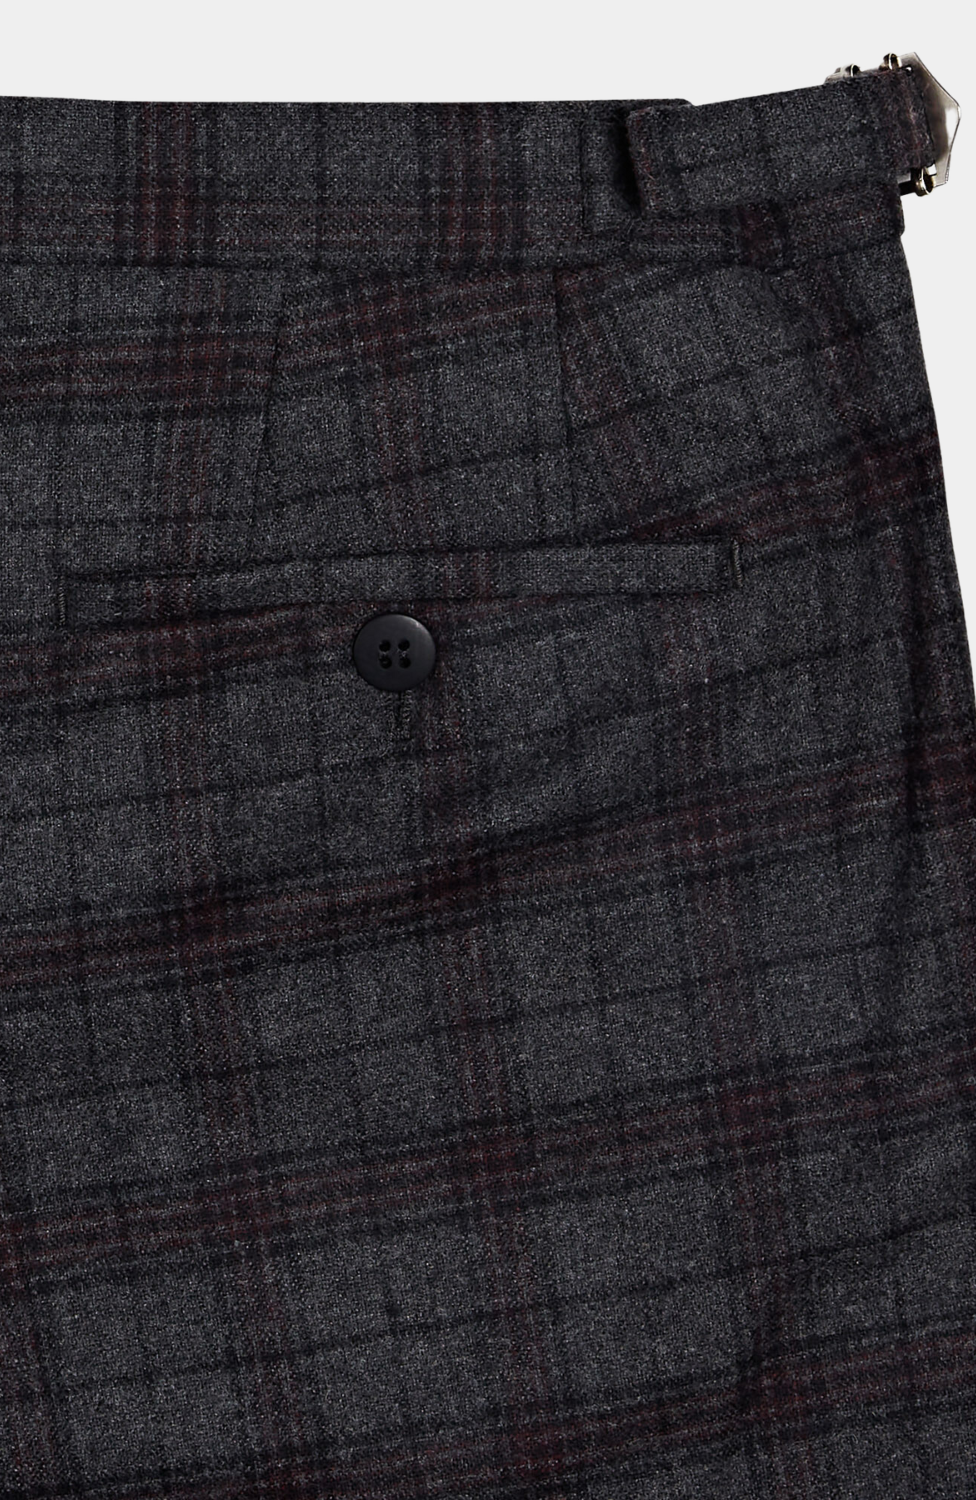 INISHEER CHECK TWEED TROUSER - HIRE